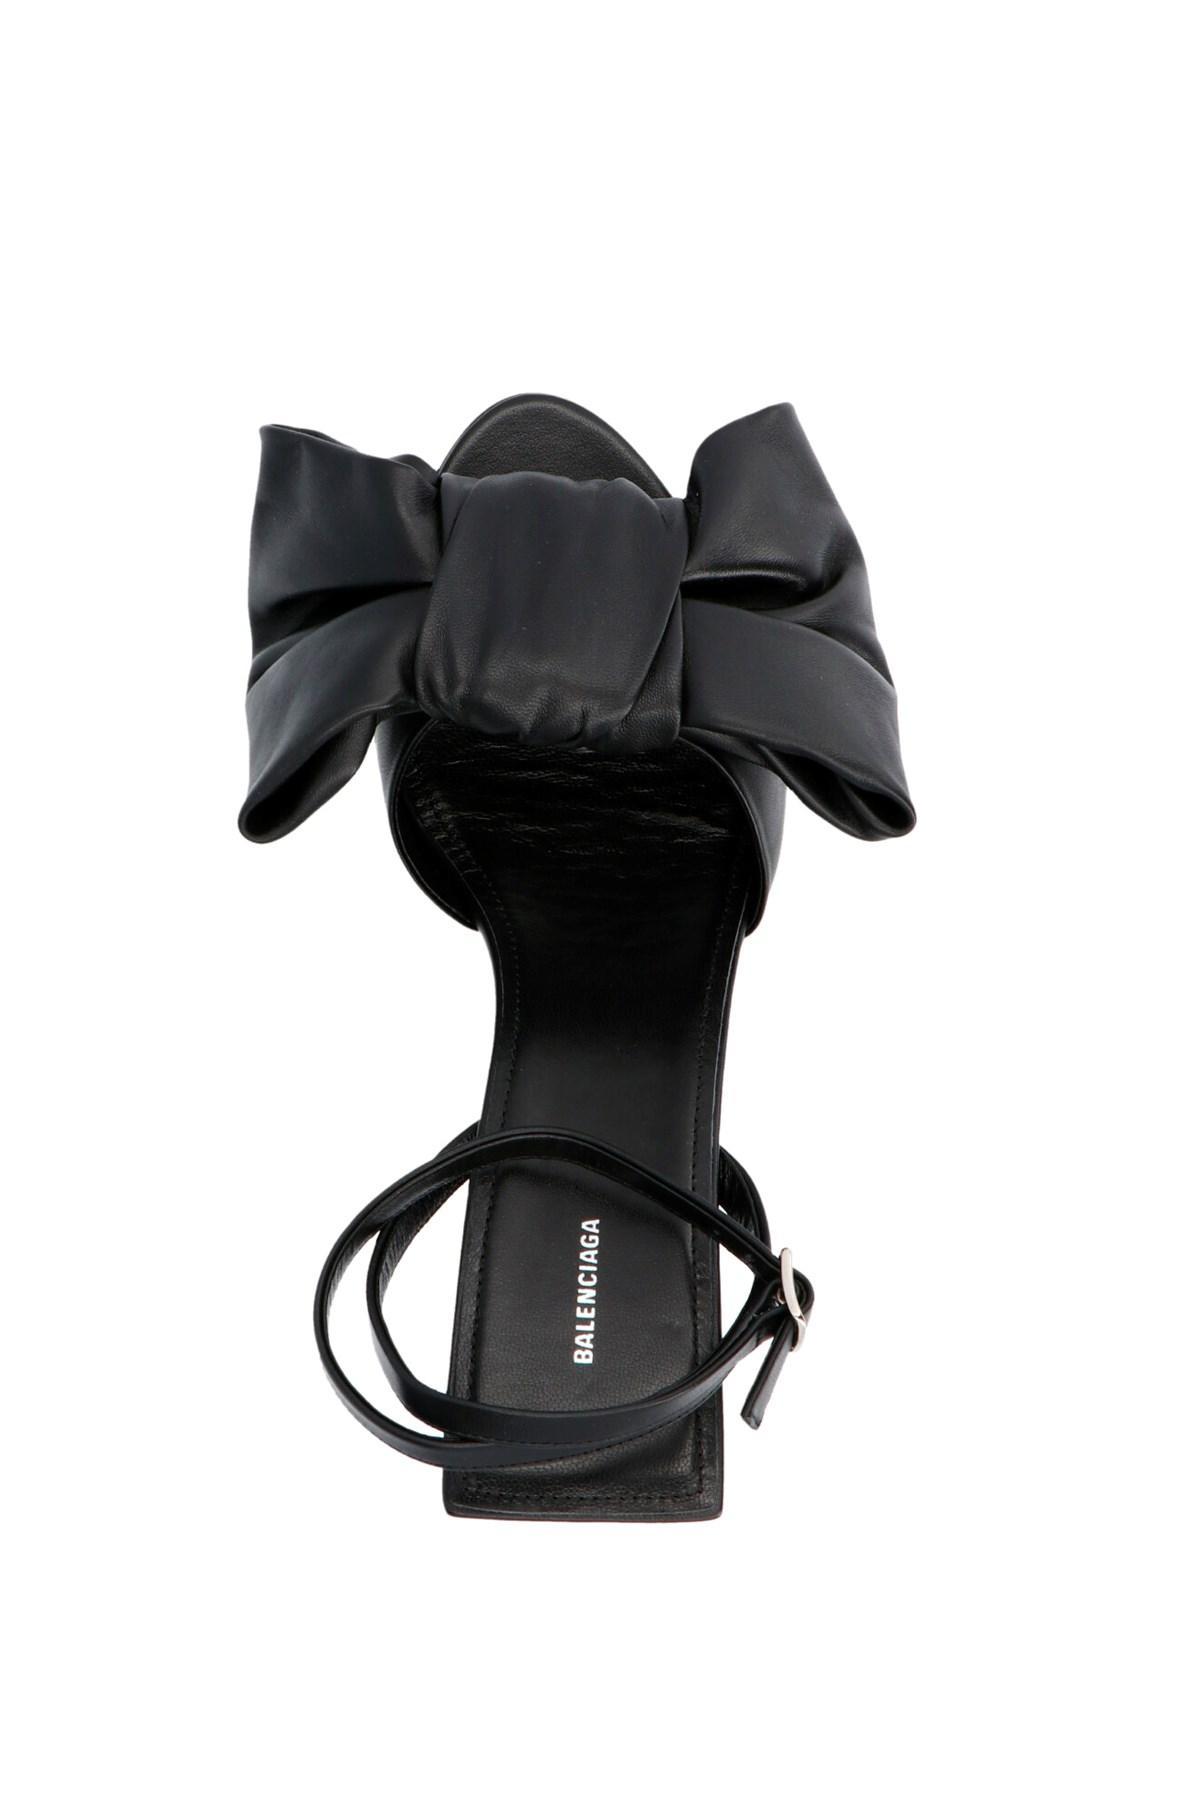 vogn rysten Scully Balenciaga Bow Leather Sandal in Black | Lyst